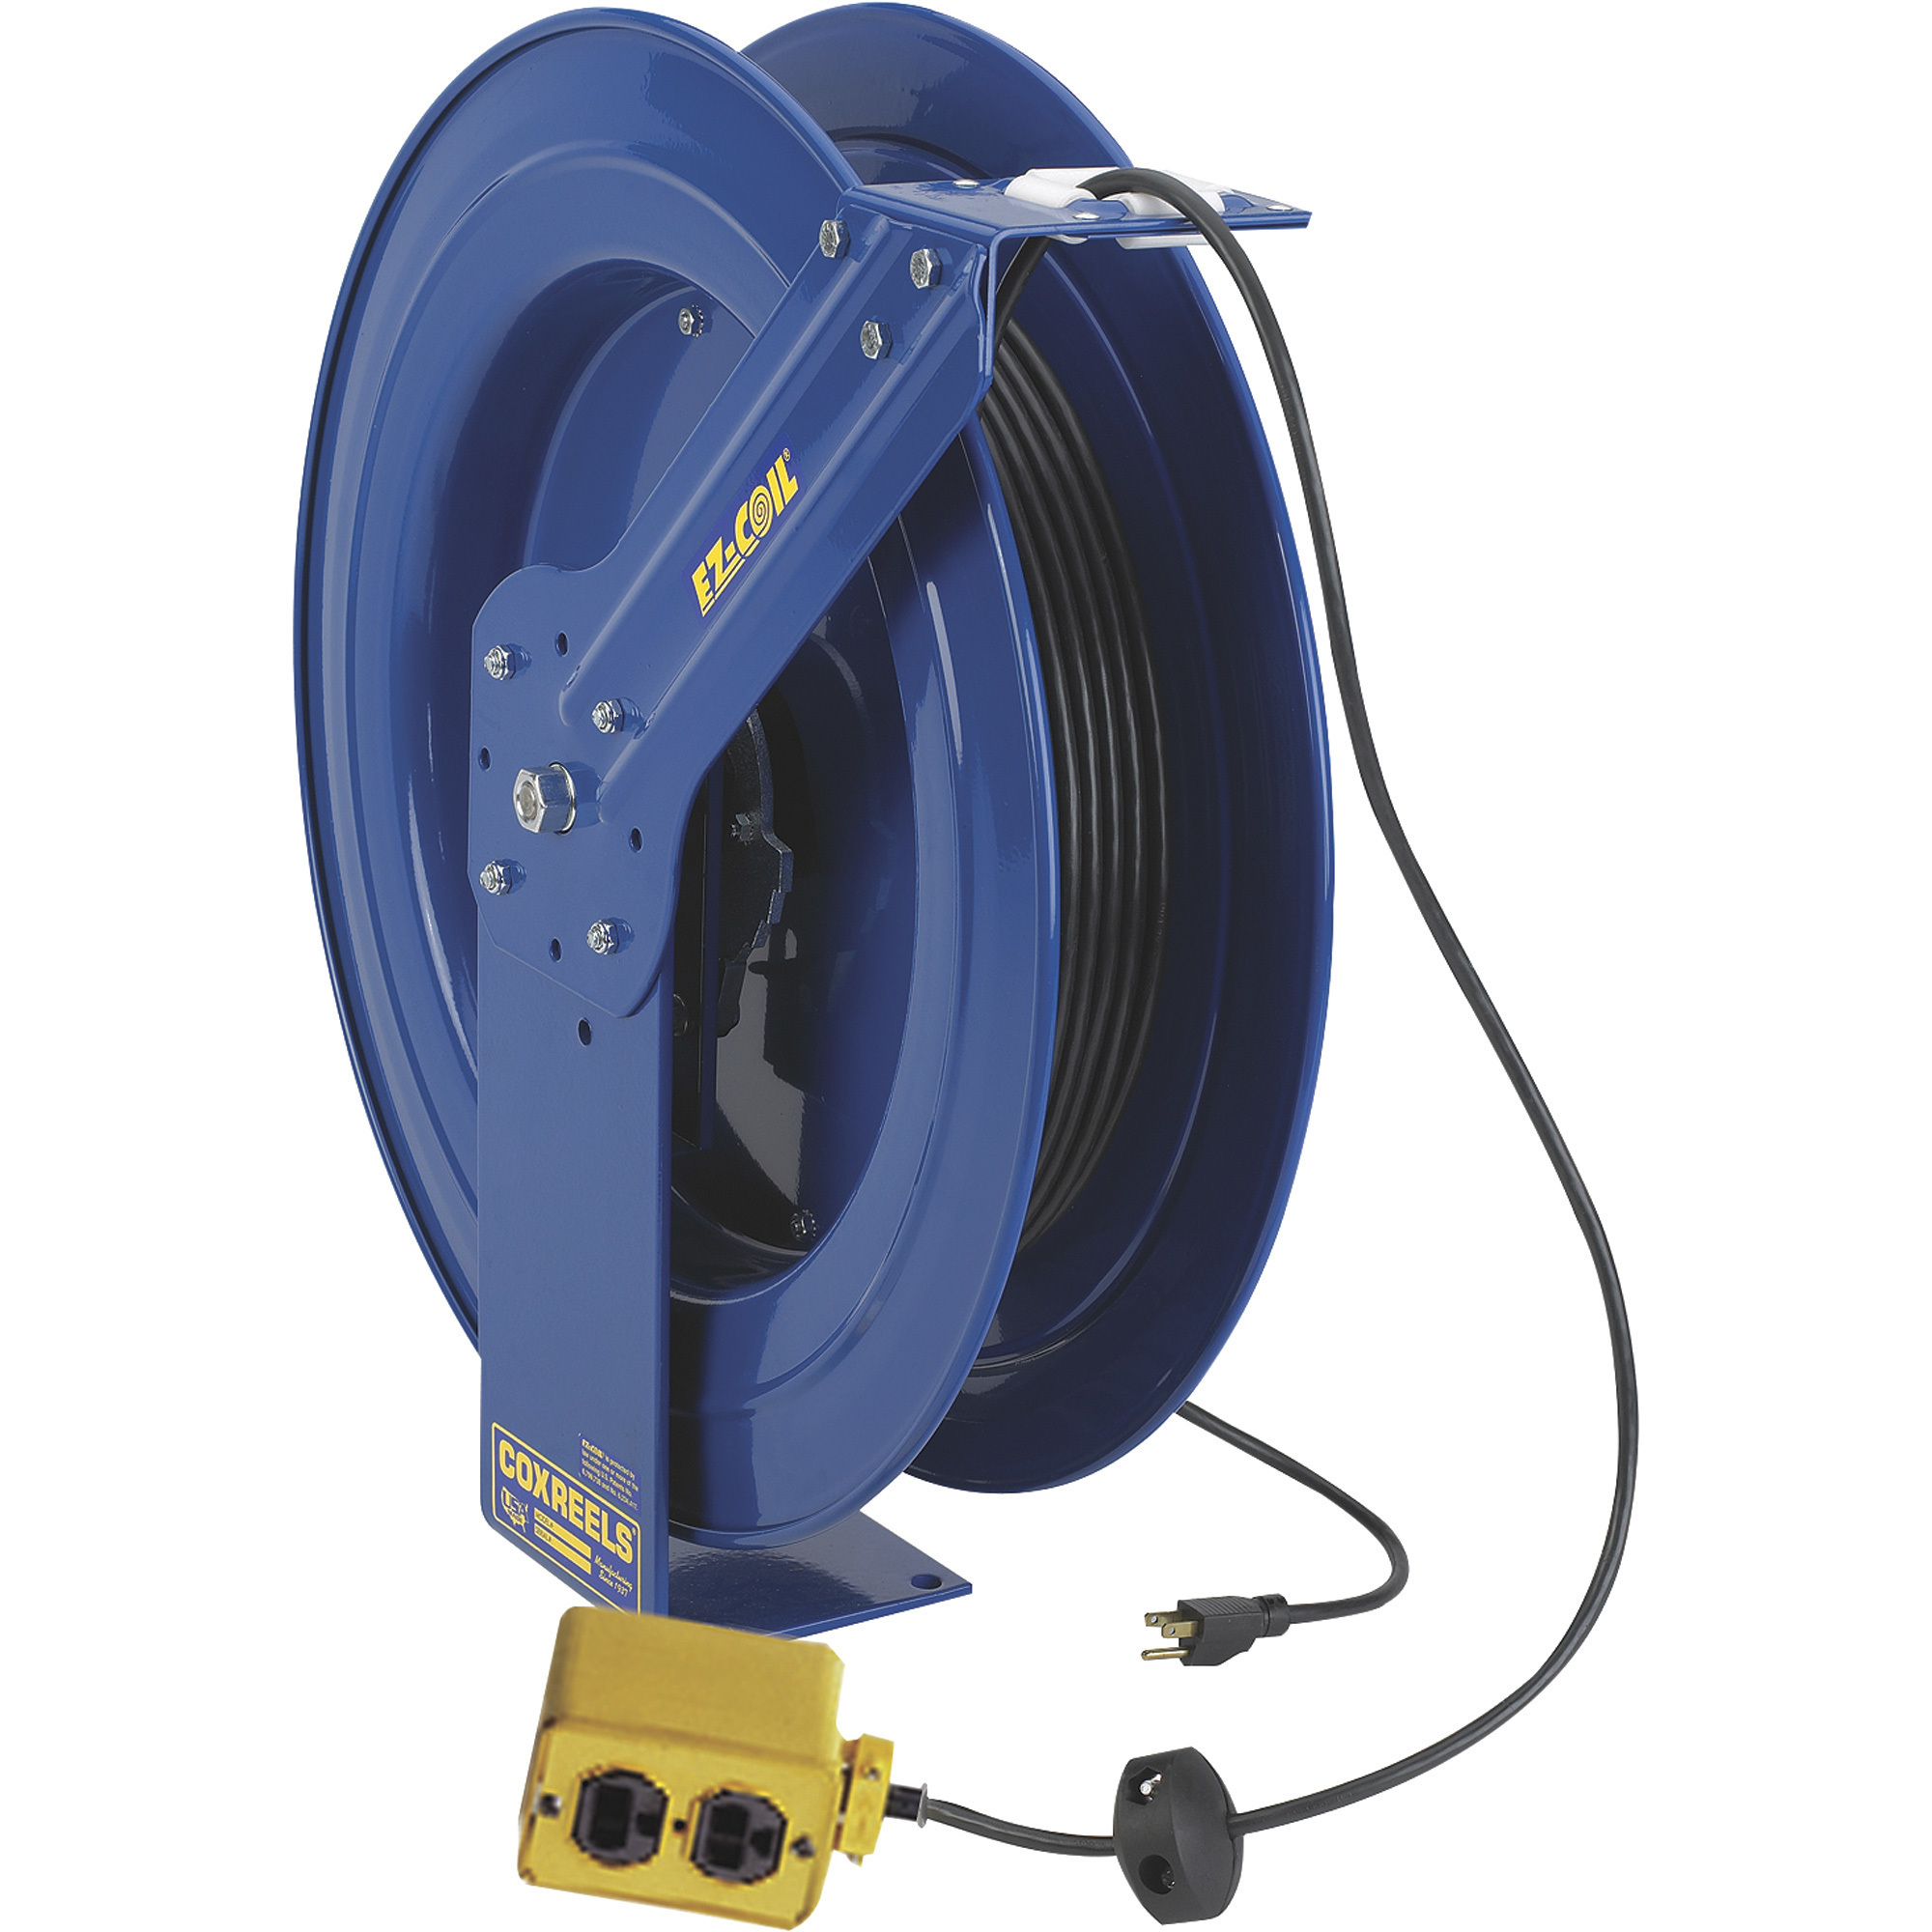 Coxreels EZ-Coil Safety Series Extension Cord Reel with Quad